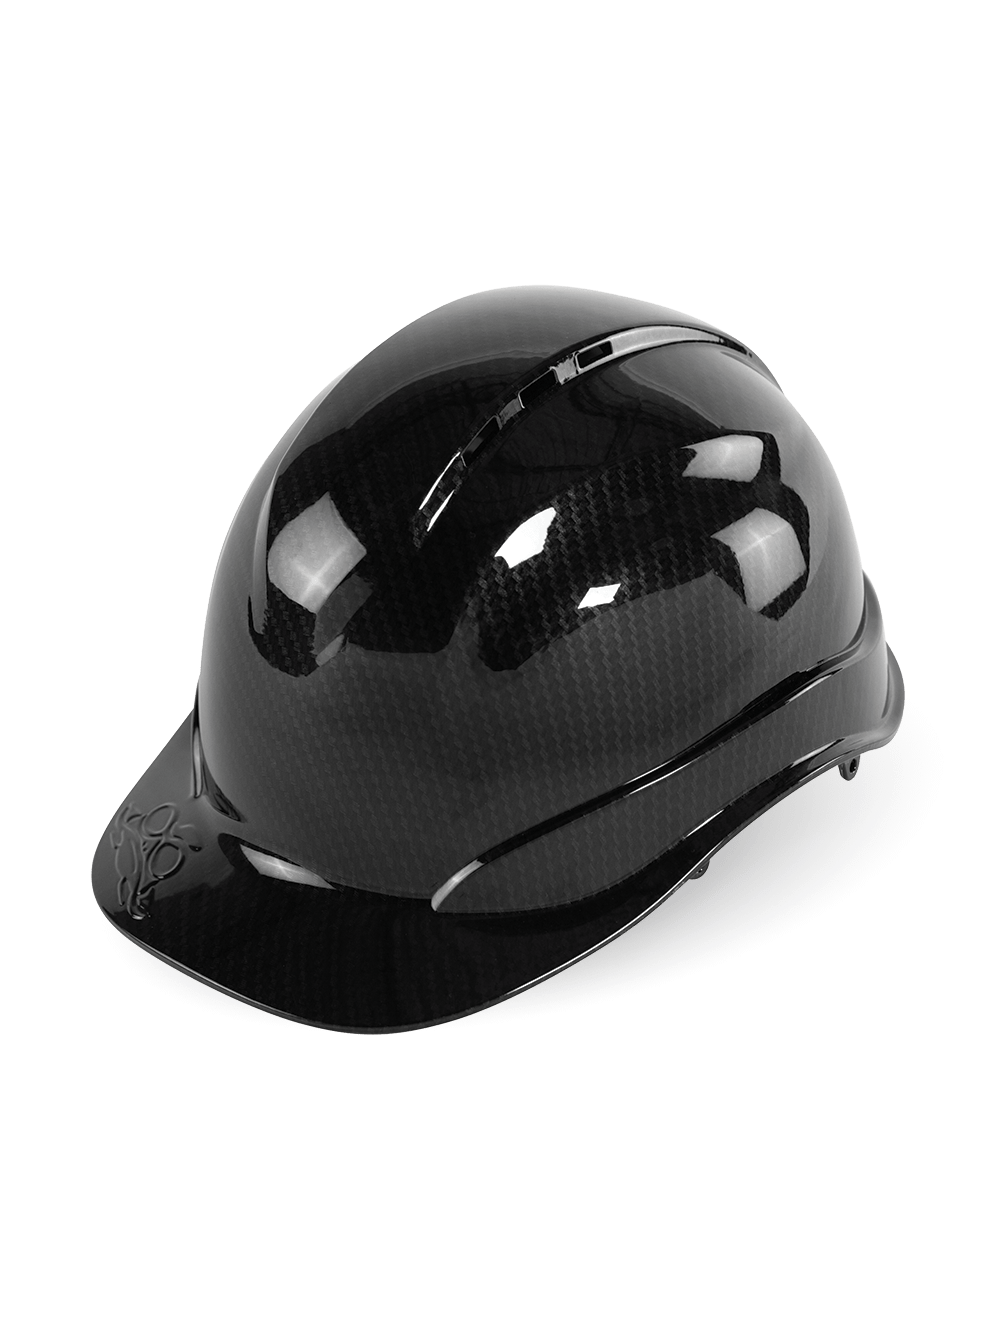 Bullhead Safety™ Head Protection Shiny Black Graphite Vented Cap Style Hard Hat With Six-Point Ratchet Suspension - HH-C3-C